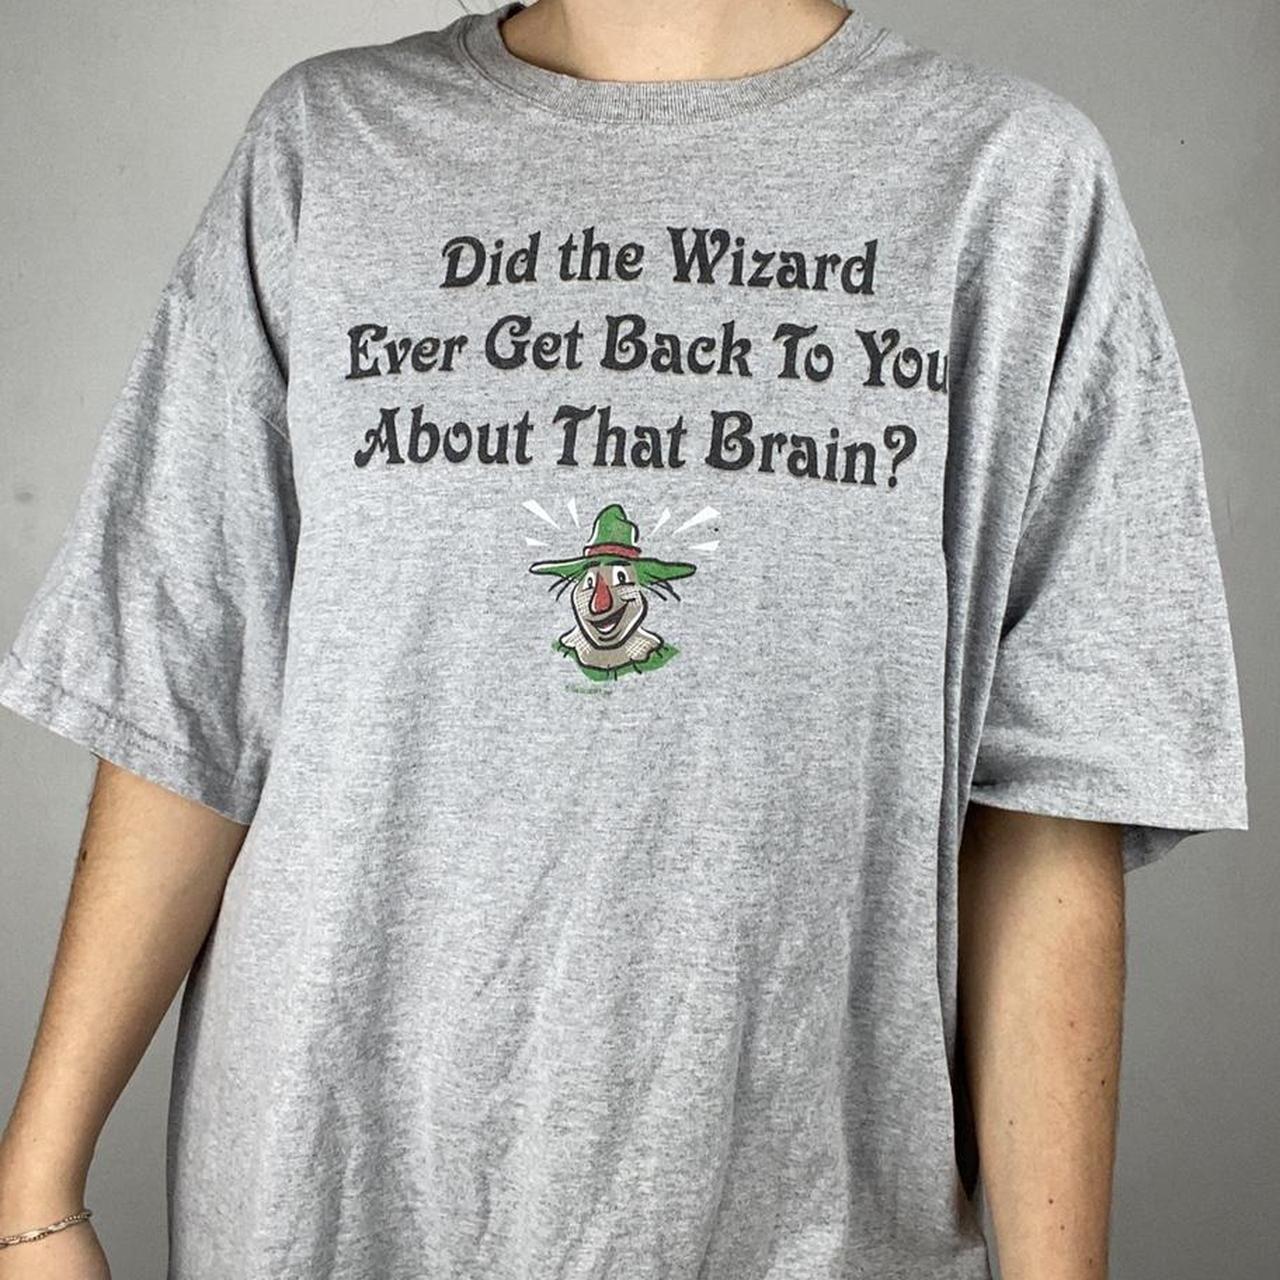 Product Image 1 - Funny Tee🥞
This super funny Wizard